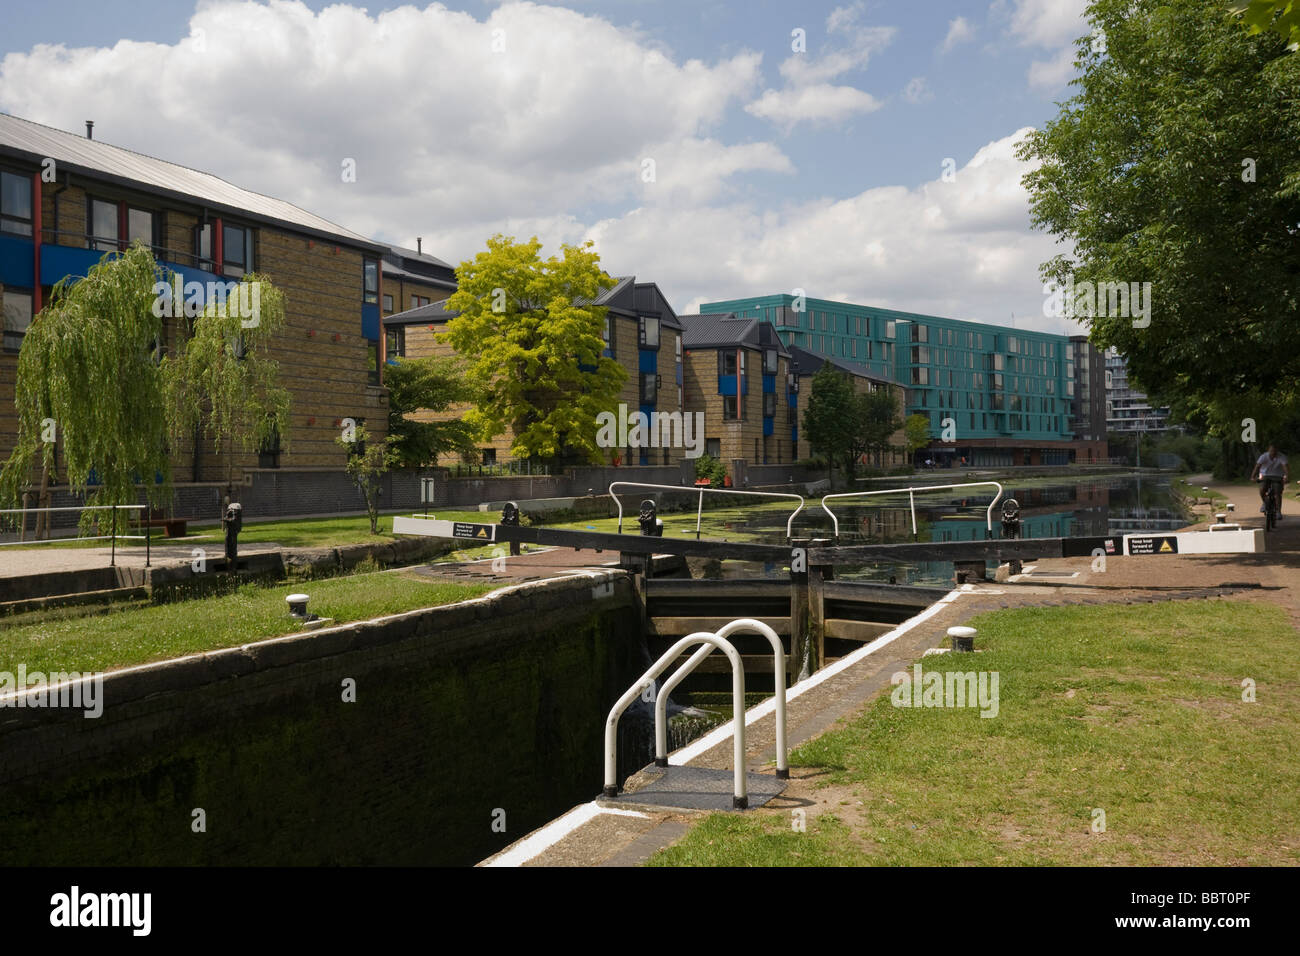 'Mile End Lock' 'Regent's Canal' 'Mile End' 'Tower Hamlets' Lock keepers House' east London GB UK London Borough Tower Hamlets Stock Photo